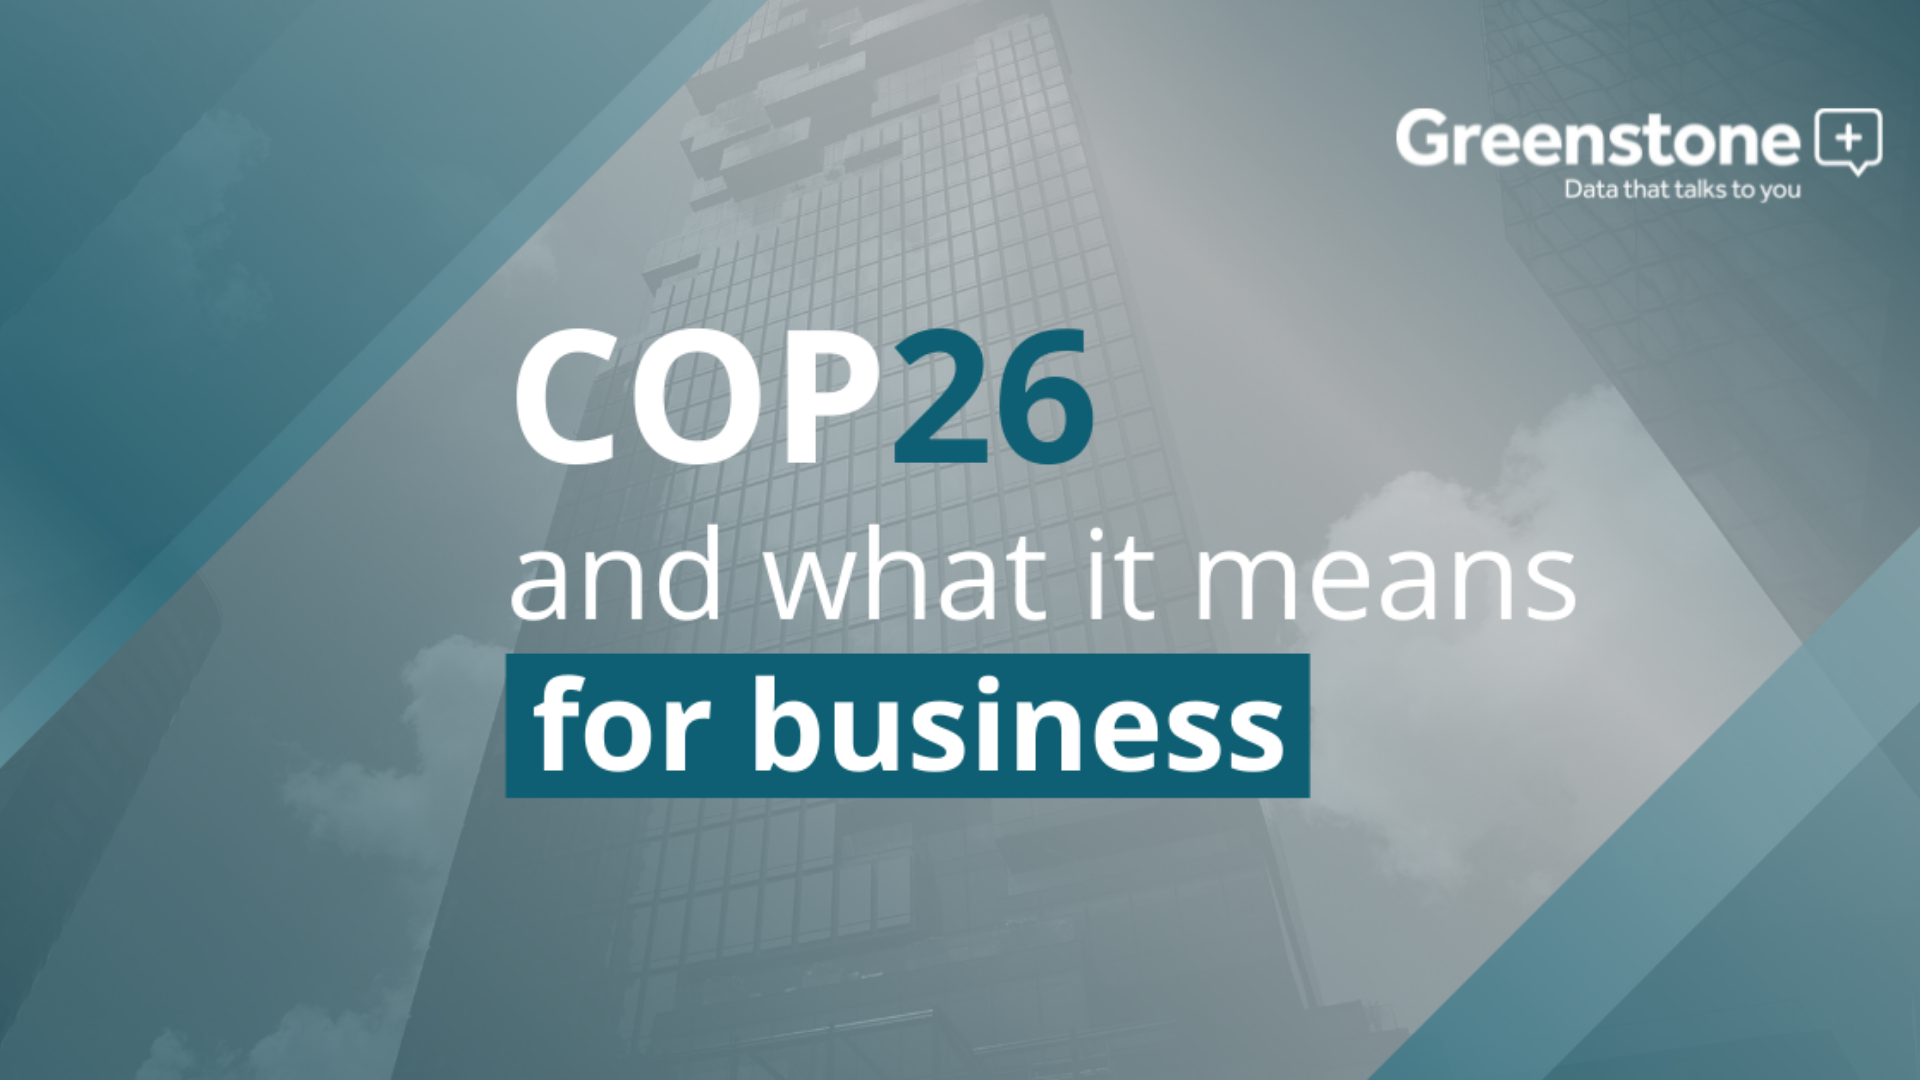 COP26 and what it means for business